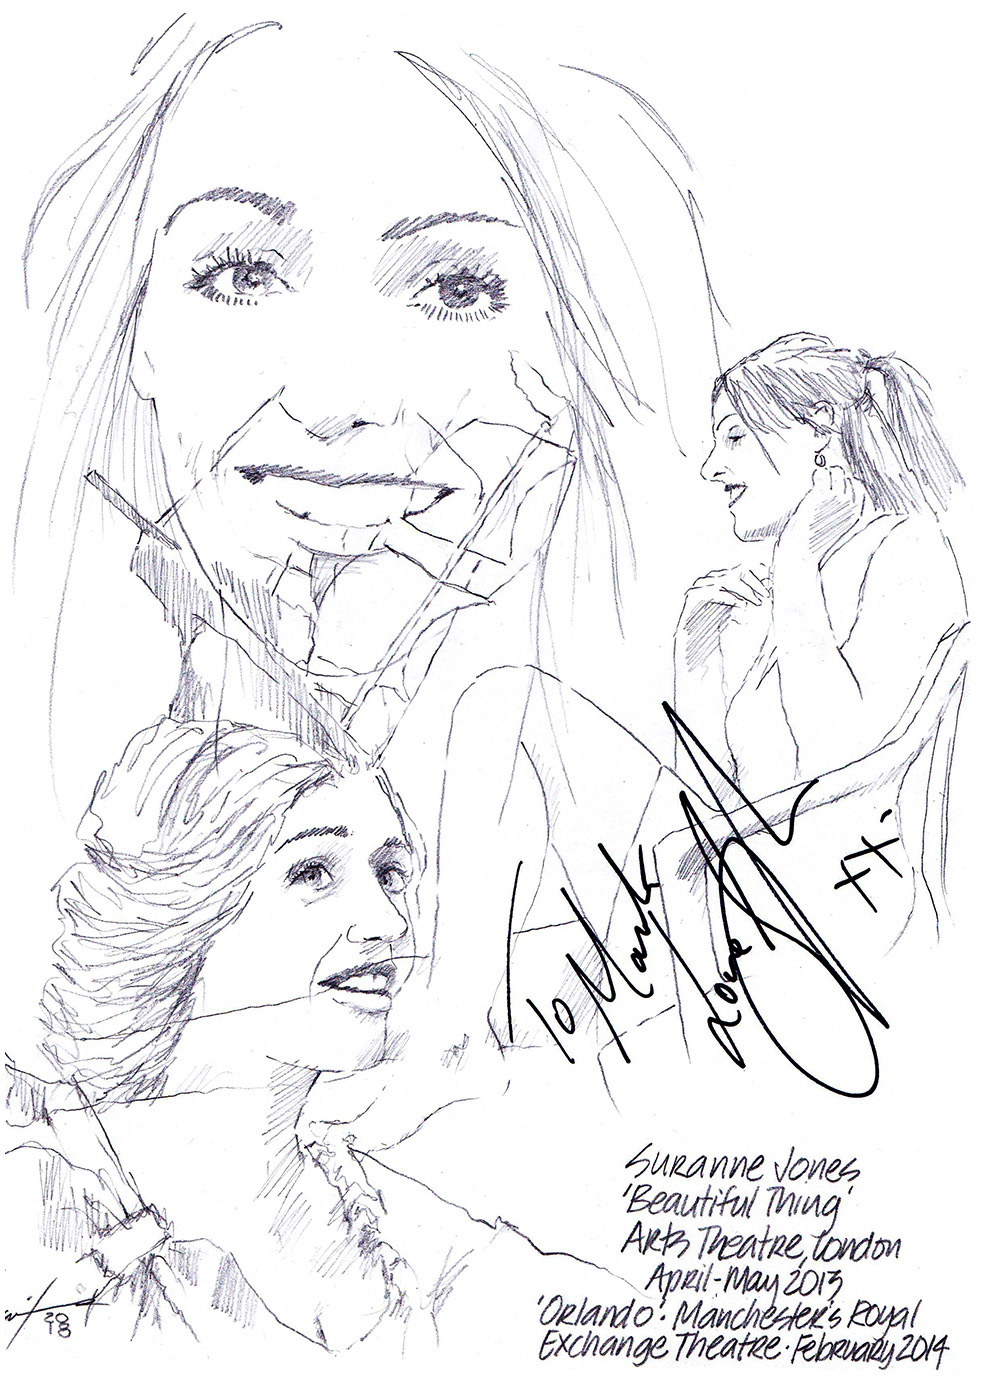 Autographed drawing of Suranne Jones in Beautiful Thing at the Arts Theatre in London and in Orlando at Manchester's Royal Exchange Theatre